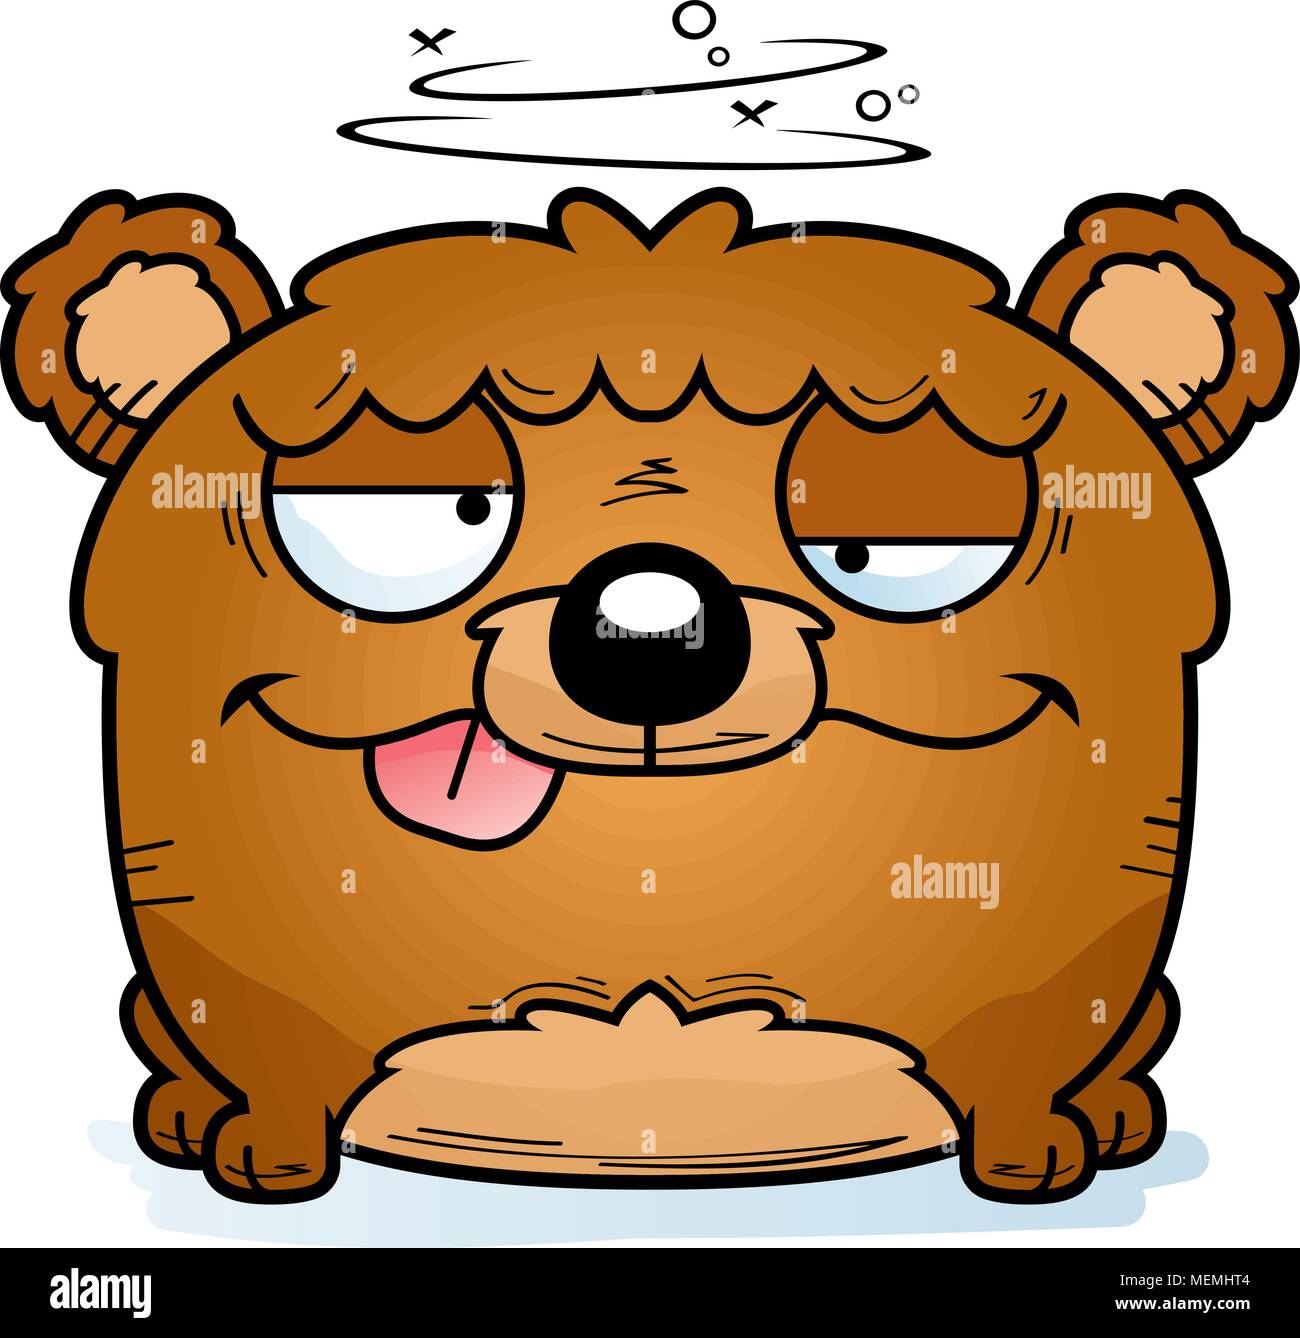 A cartoon illustration of a bear cub with a goofy expression Stock ...